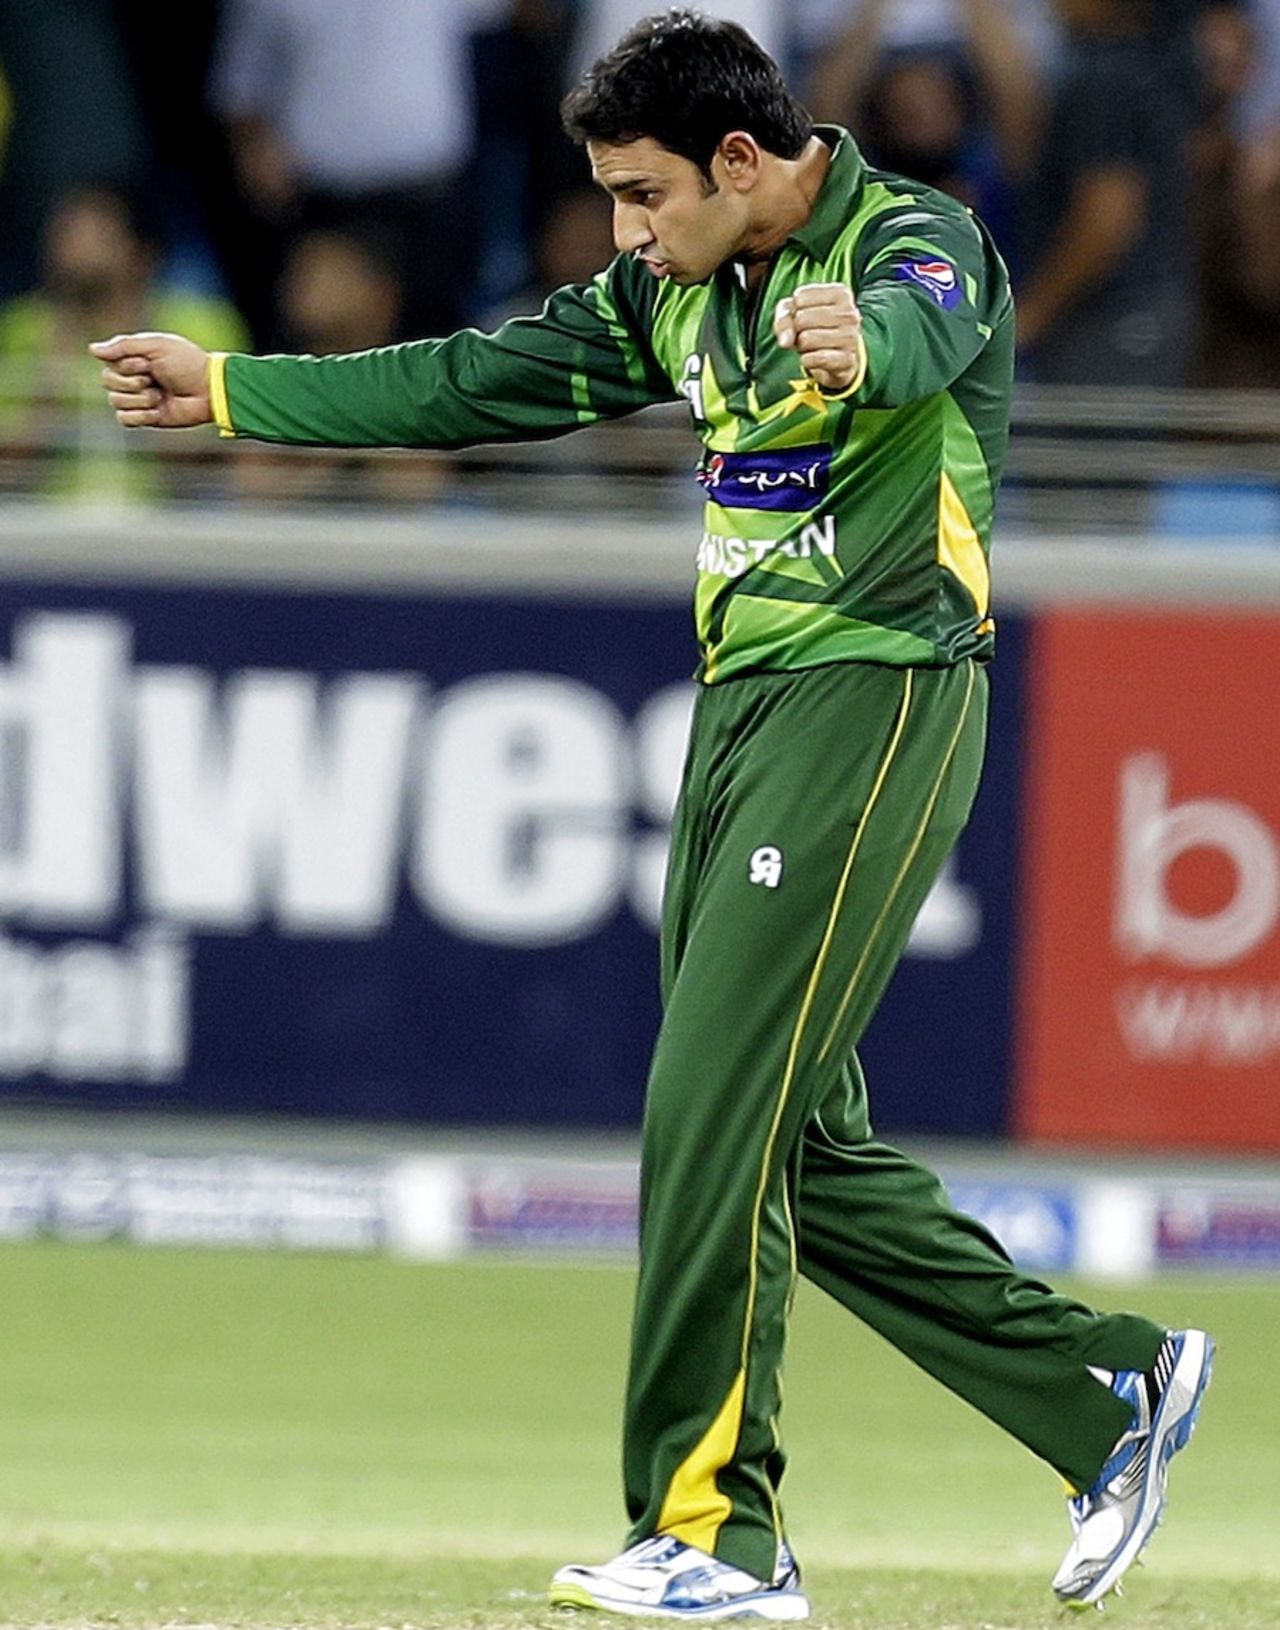 Saeed Ajmal picked up two wickets in his economical spell, Pakistan v Australia, 3rd T20I, Dubai, September 10, 2012